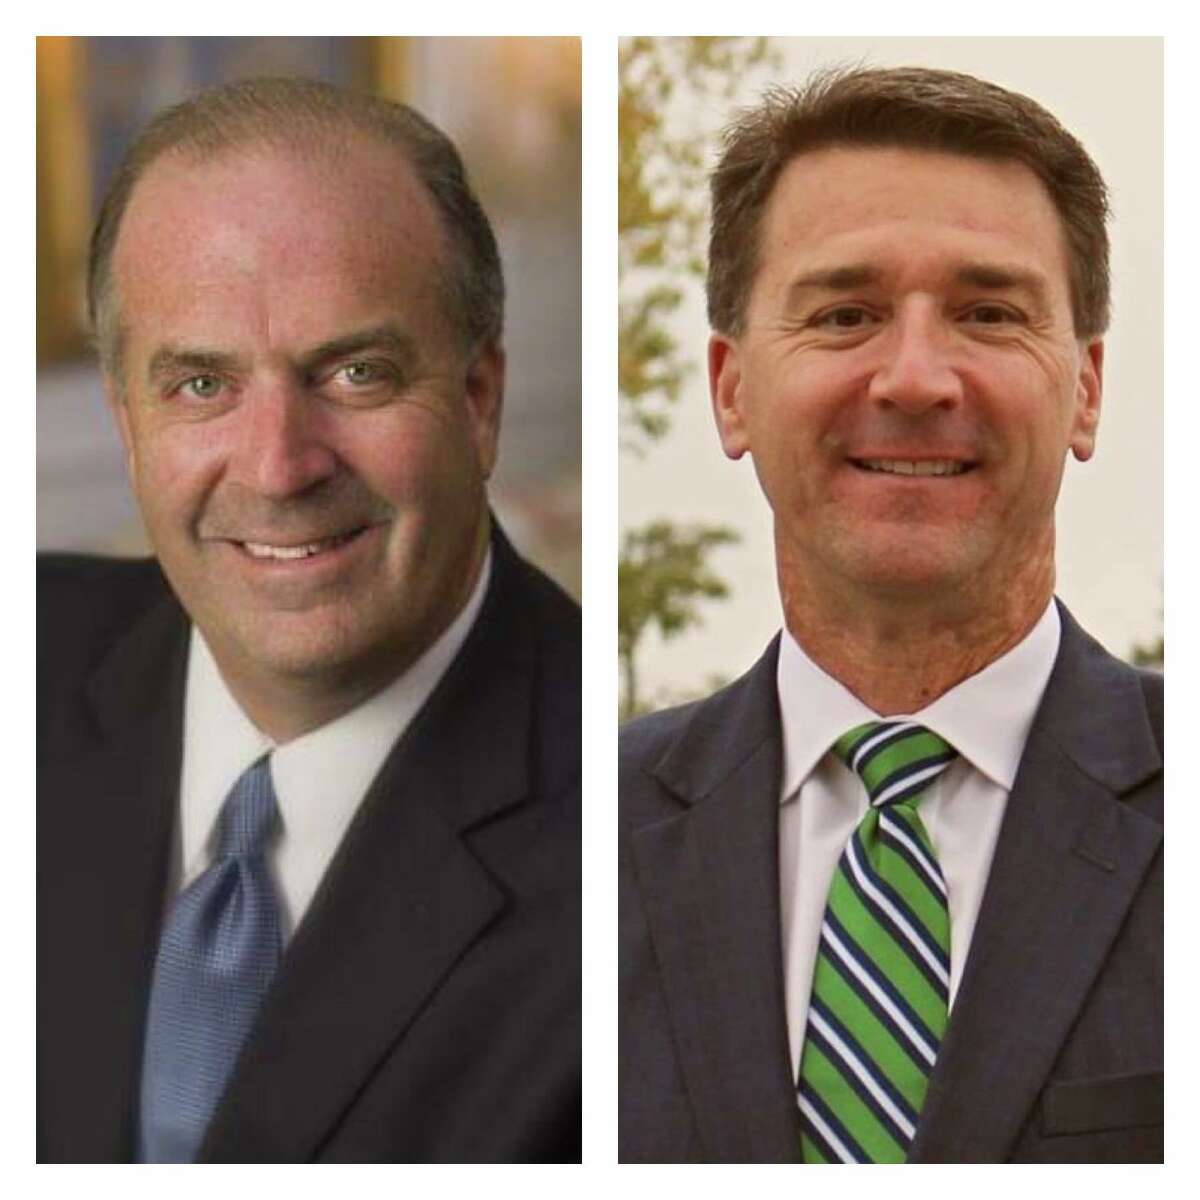 Democrat Congressman Dan Kildee and Republican Paul Junge are facing off to represent Michigan’s 8th Congressional District. The district includes Flint, Bay City, Saginaw and Midland.